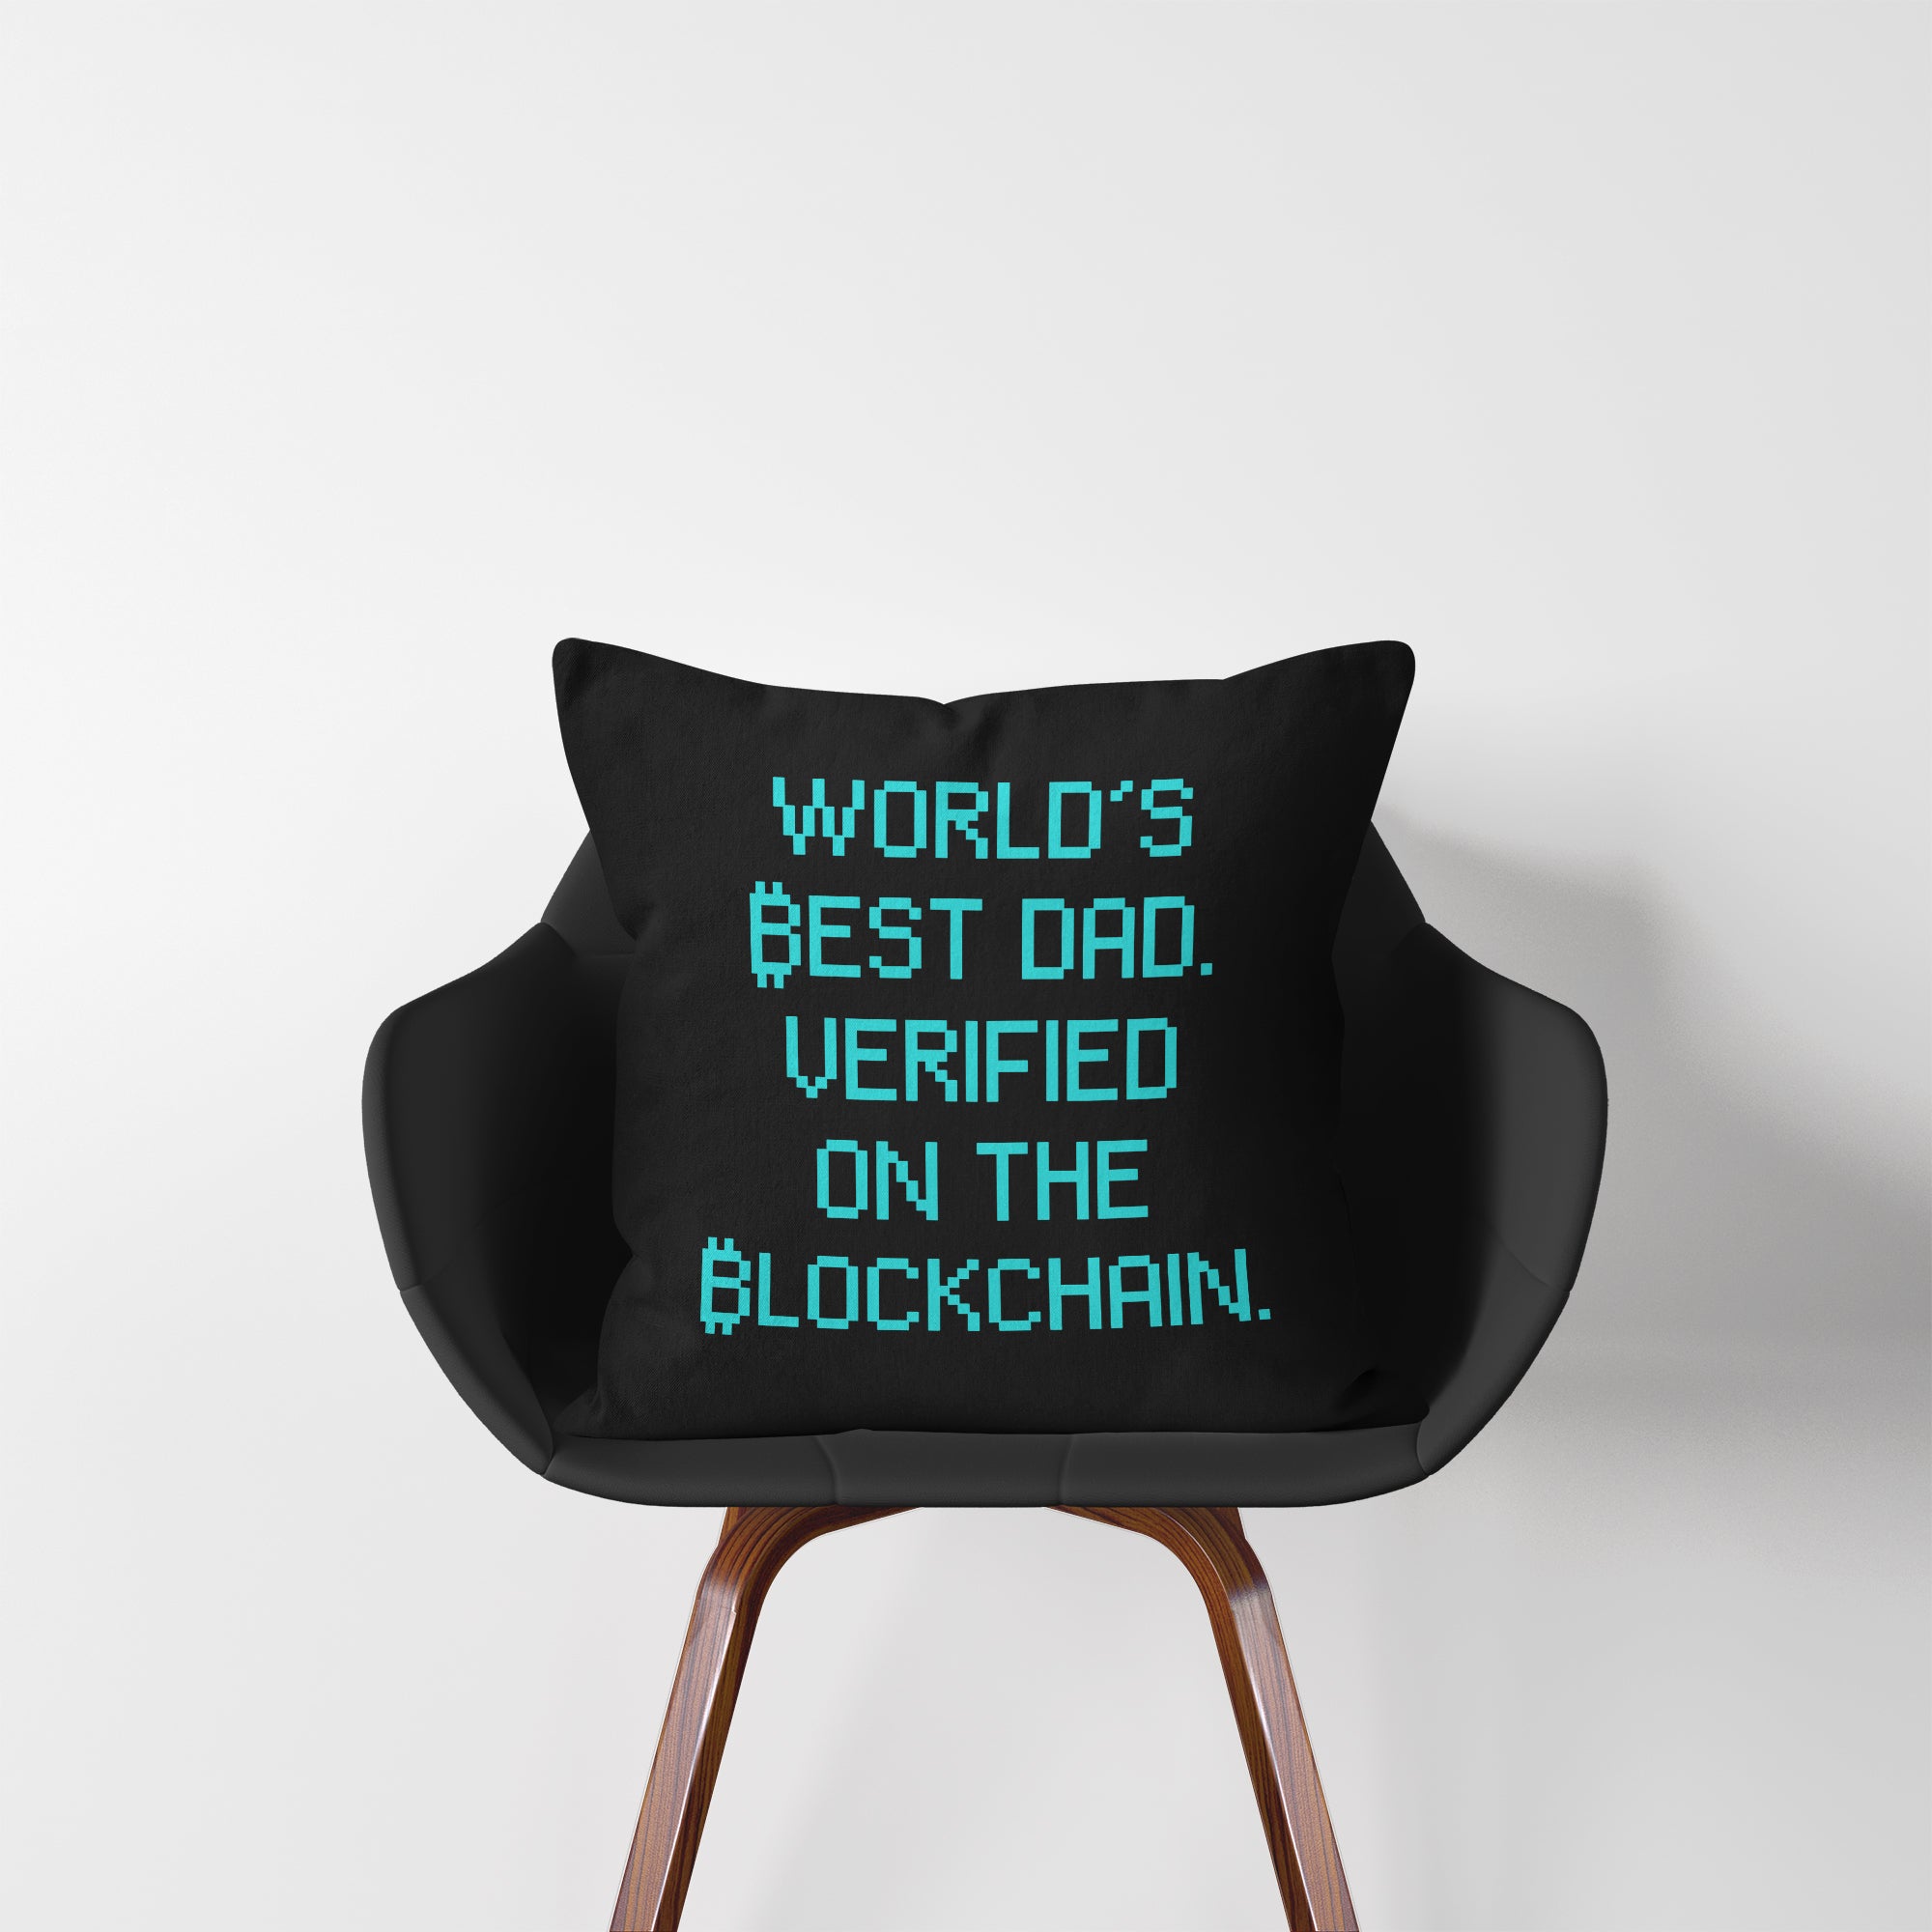 Bitcoin Decor - World's Best Dad - Verified on the Blockchain Throw Pillow displayed on a chair. Available at NEONCRYPTO STORE.